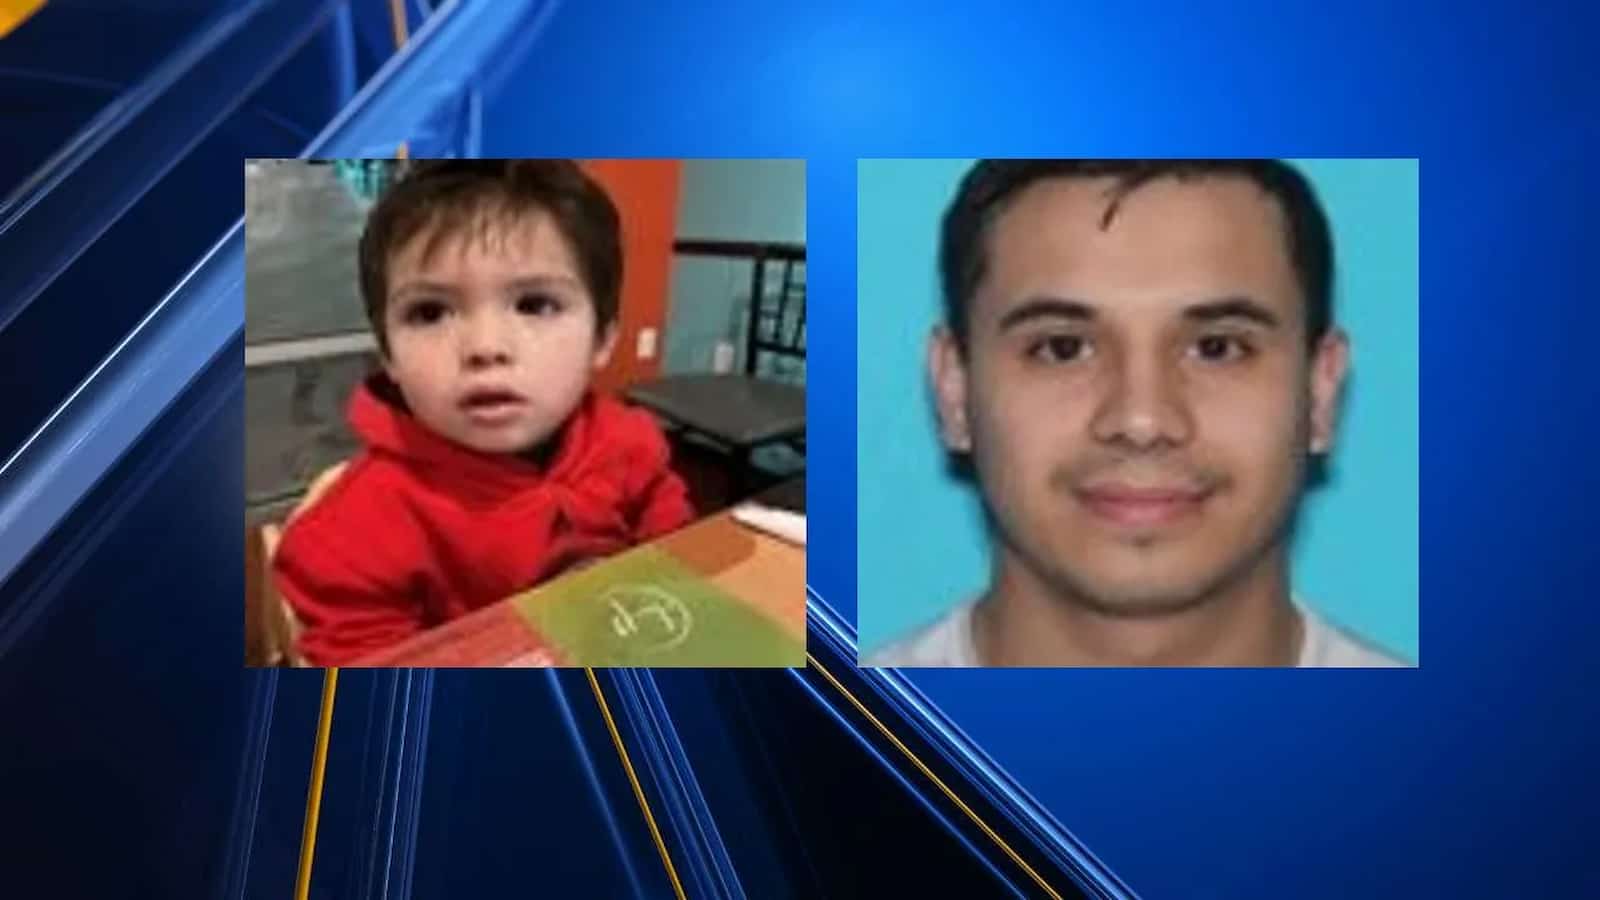 AMBER Alert issued for missing 2-year-old in El Paso